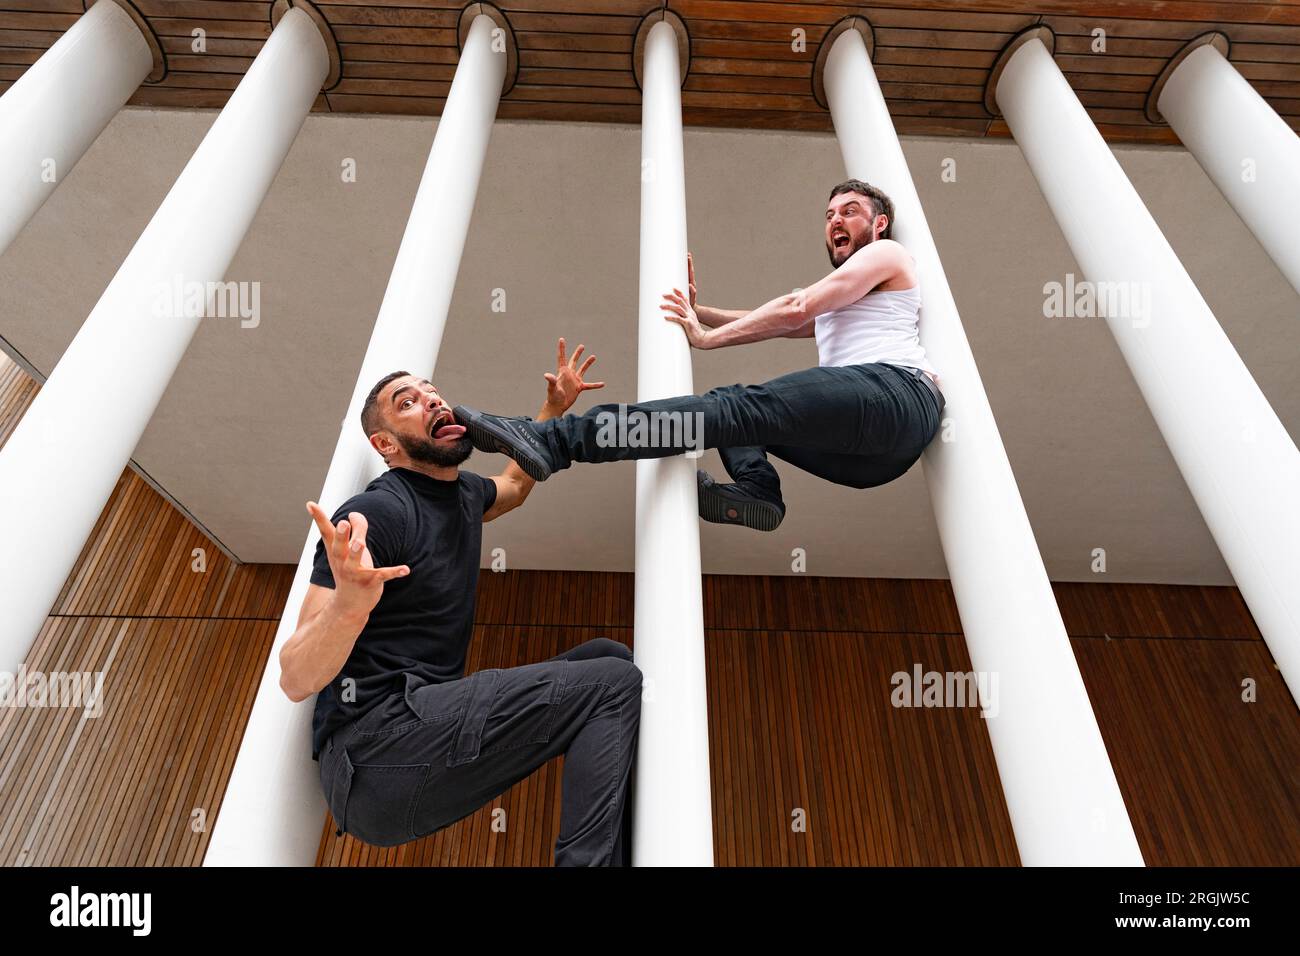 Edinburgh, Scotland, UK. 10th August 2023.  Performers David Banks and Sadiq Ali act out stuntman scenes from the movies. Their show Stuntman looks at the impact of action-hero role models on men and boys by taking inspiration from movies such as Die Hard and John Wick. The show is running at Summerhall.  Iain Masterton/Alamy Live News Stock Photo